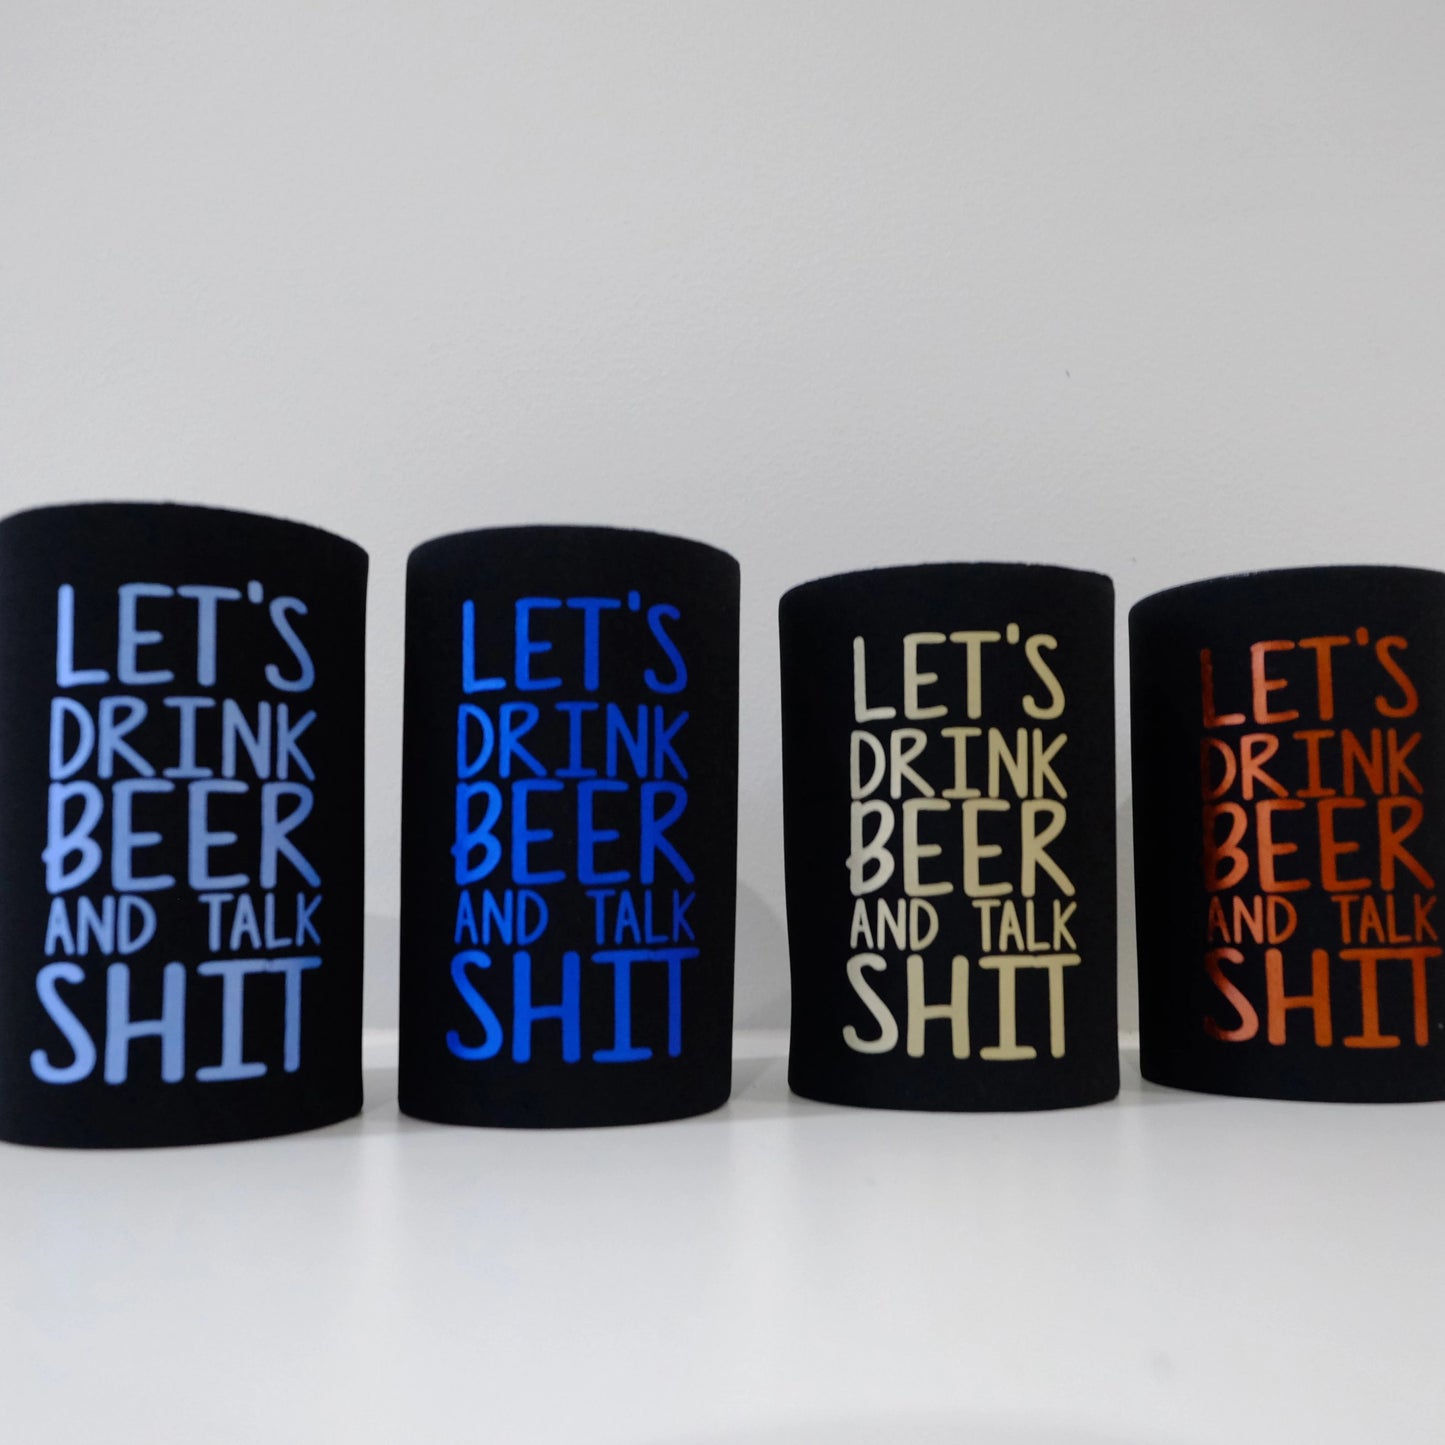 Stubby Cooler - Let's drink beer and talk shit